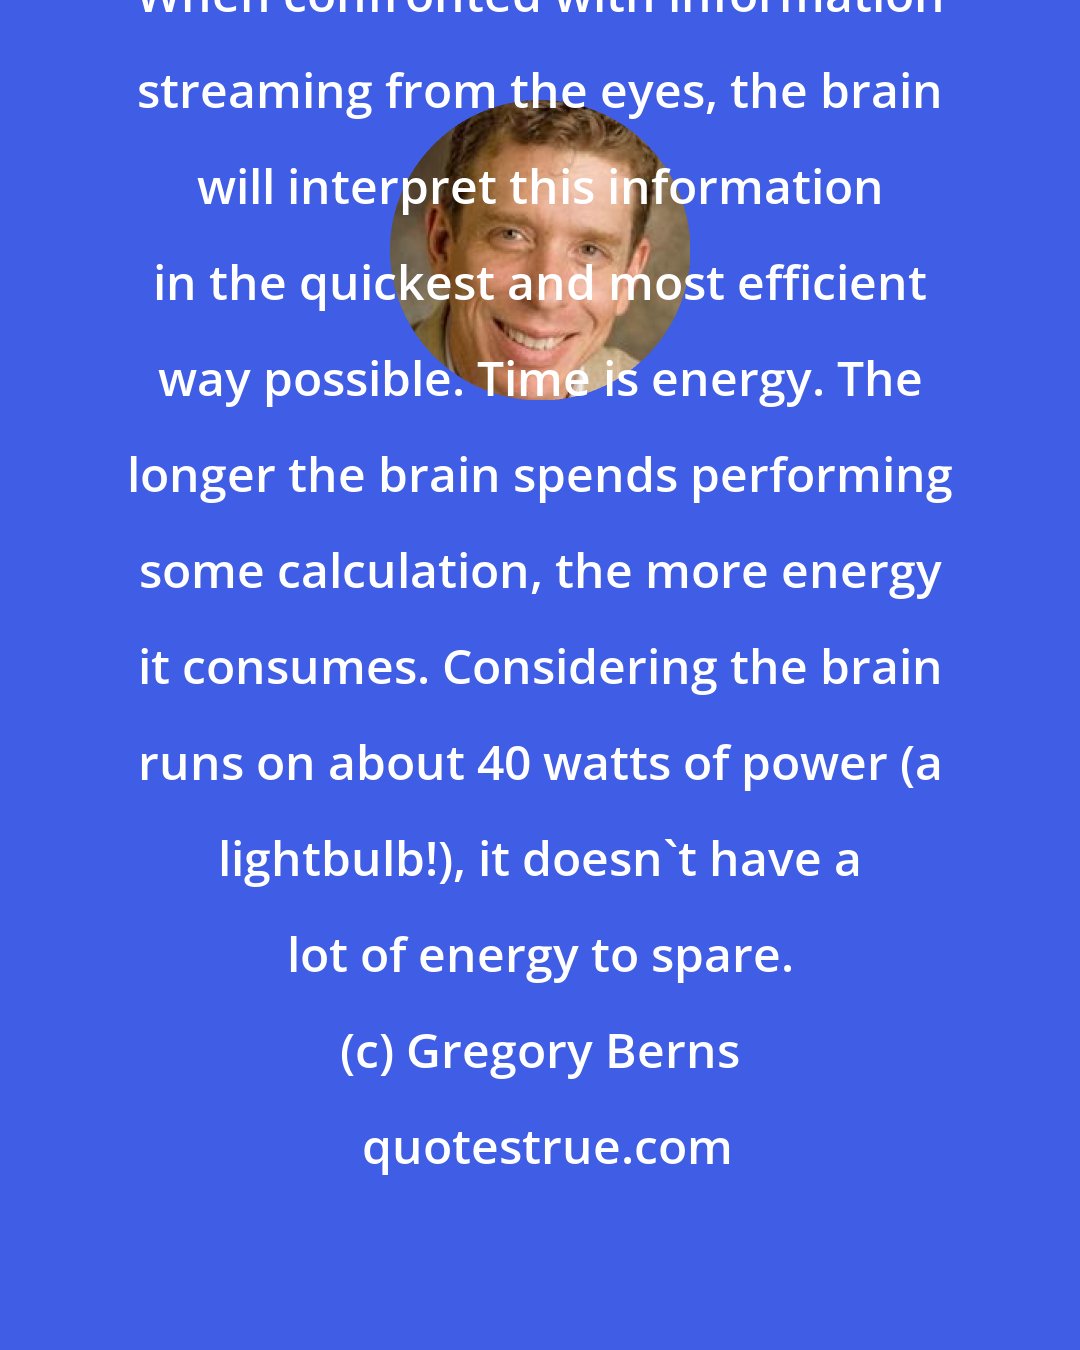 Gregory Berns: When confronted with information streaming from the eyes, the brain will interpret this information in the quickest and most efficient way possible. Time is energy. The longer the brain spends performing some calculation, the more energy it consumes. Considering the brain runs on about 40 watts of power (a lightbulb!), it doesn't have a lot of energy to spare.